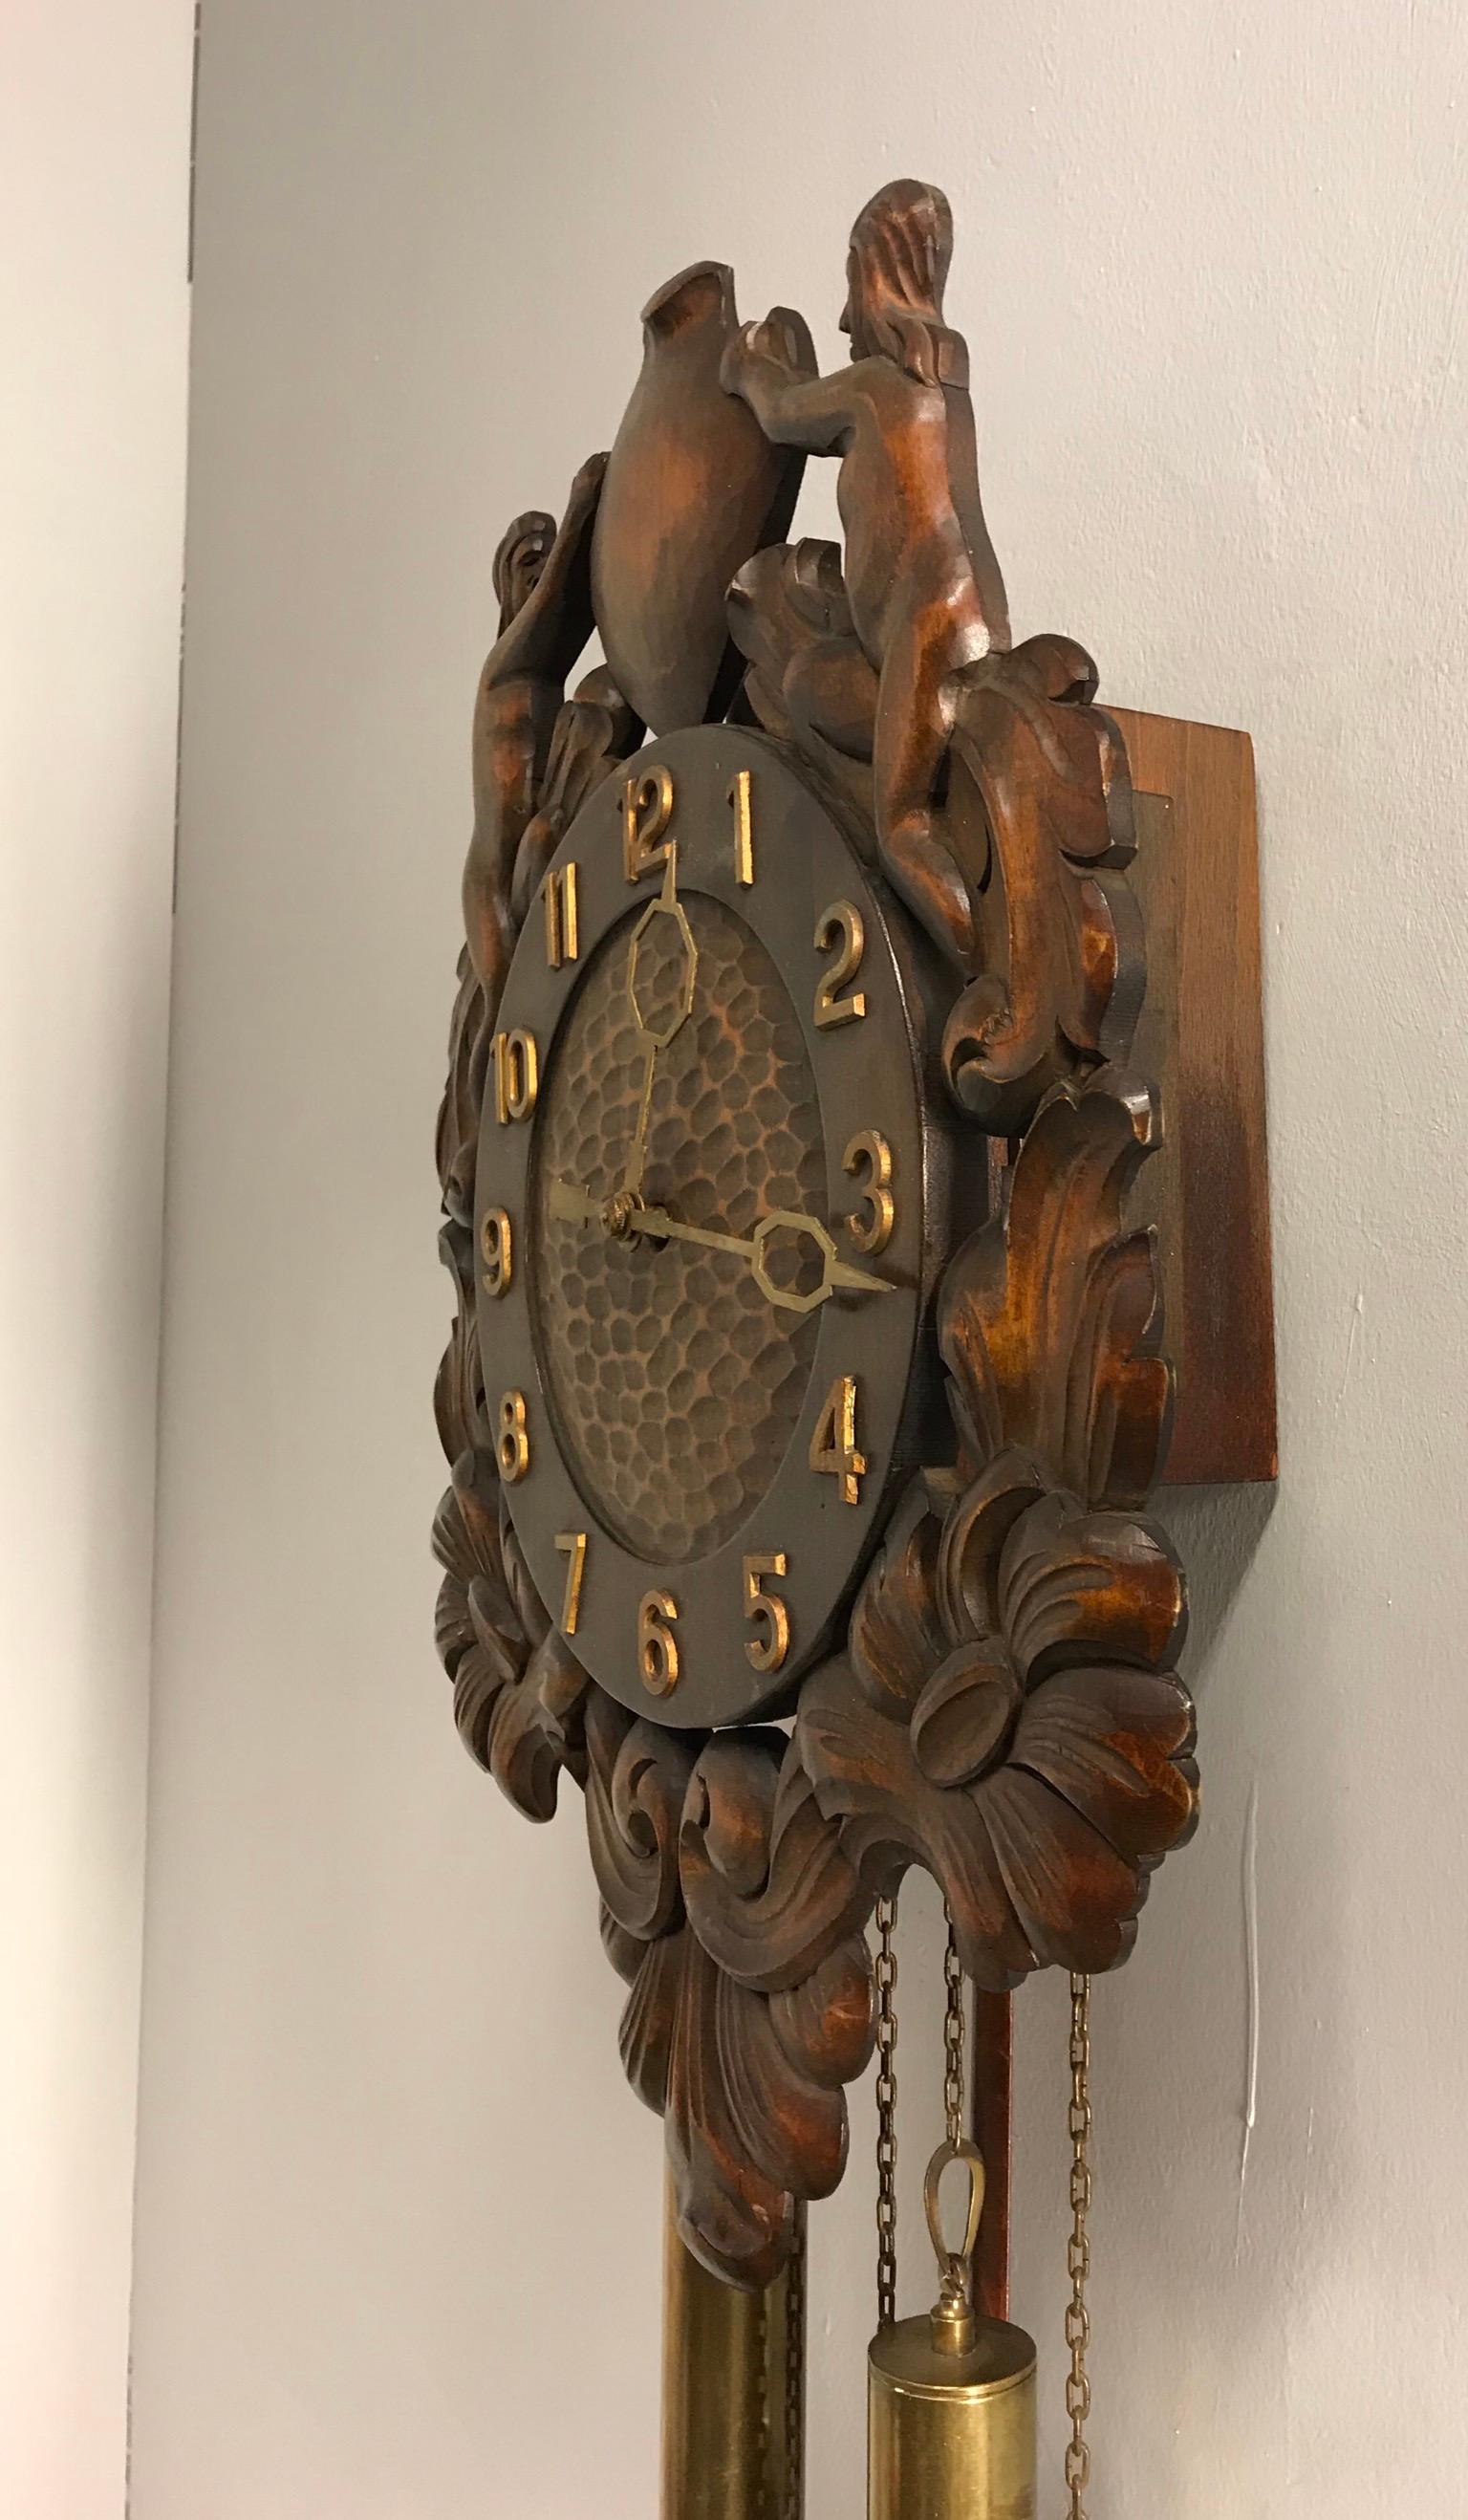 Brass Unique Denmark Made Classical Roman Wall Clock with Sculptures and Flowers For Sale